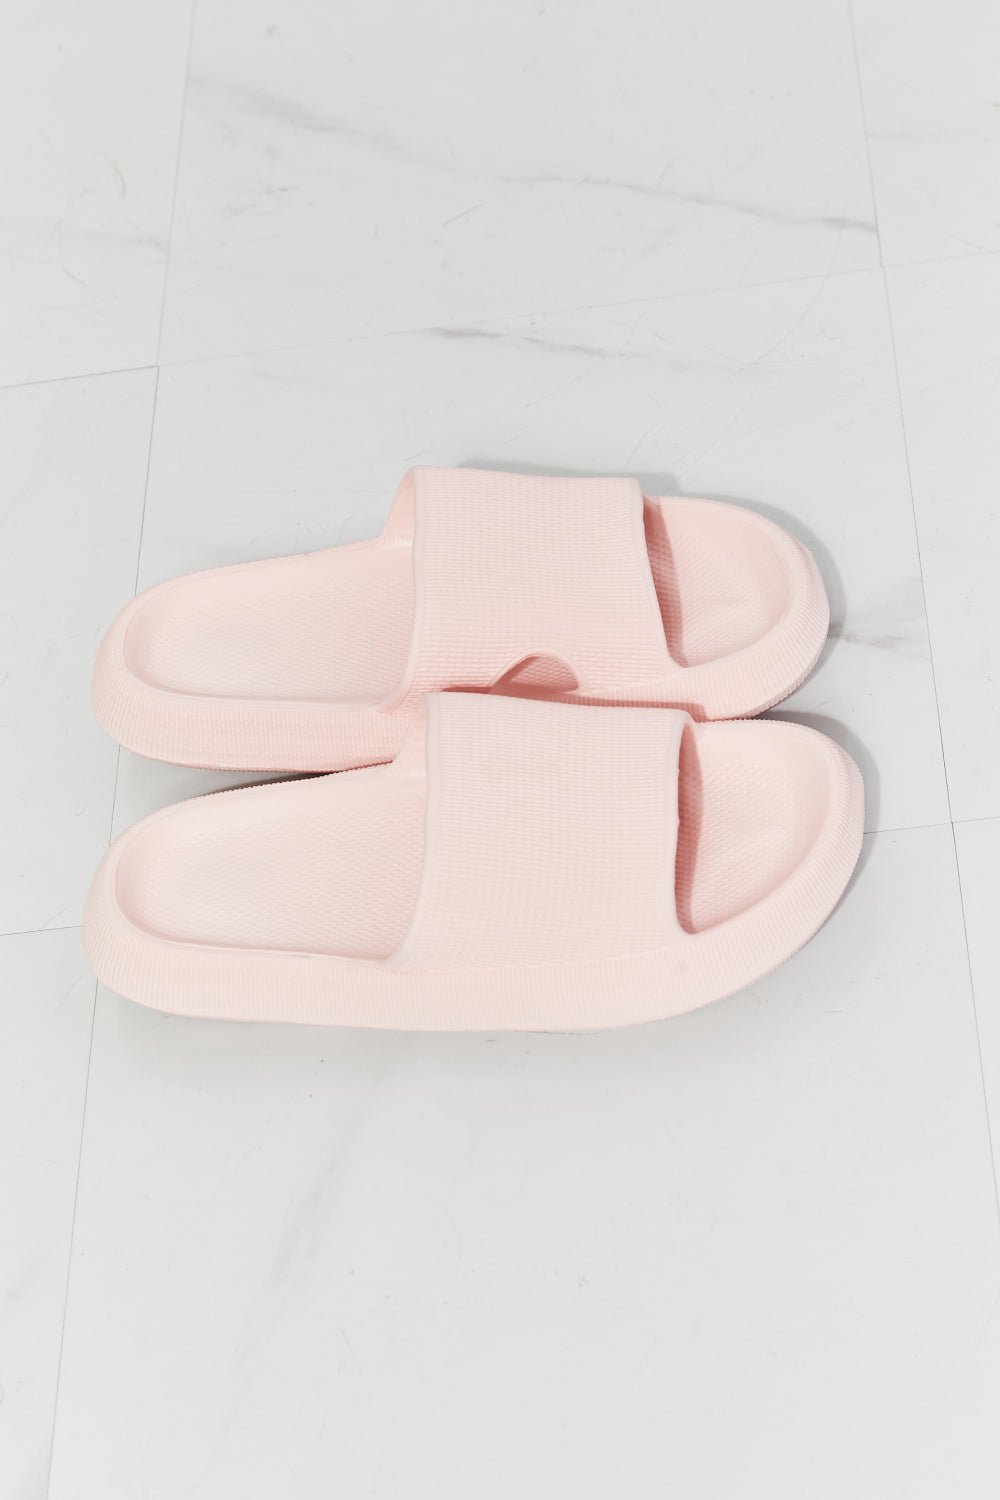 MMShoes Arms Around Me Open Toe Pink Slide - EMMY